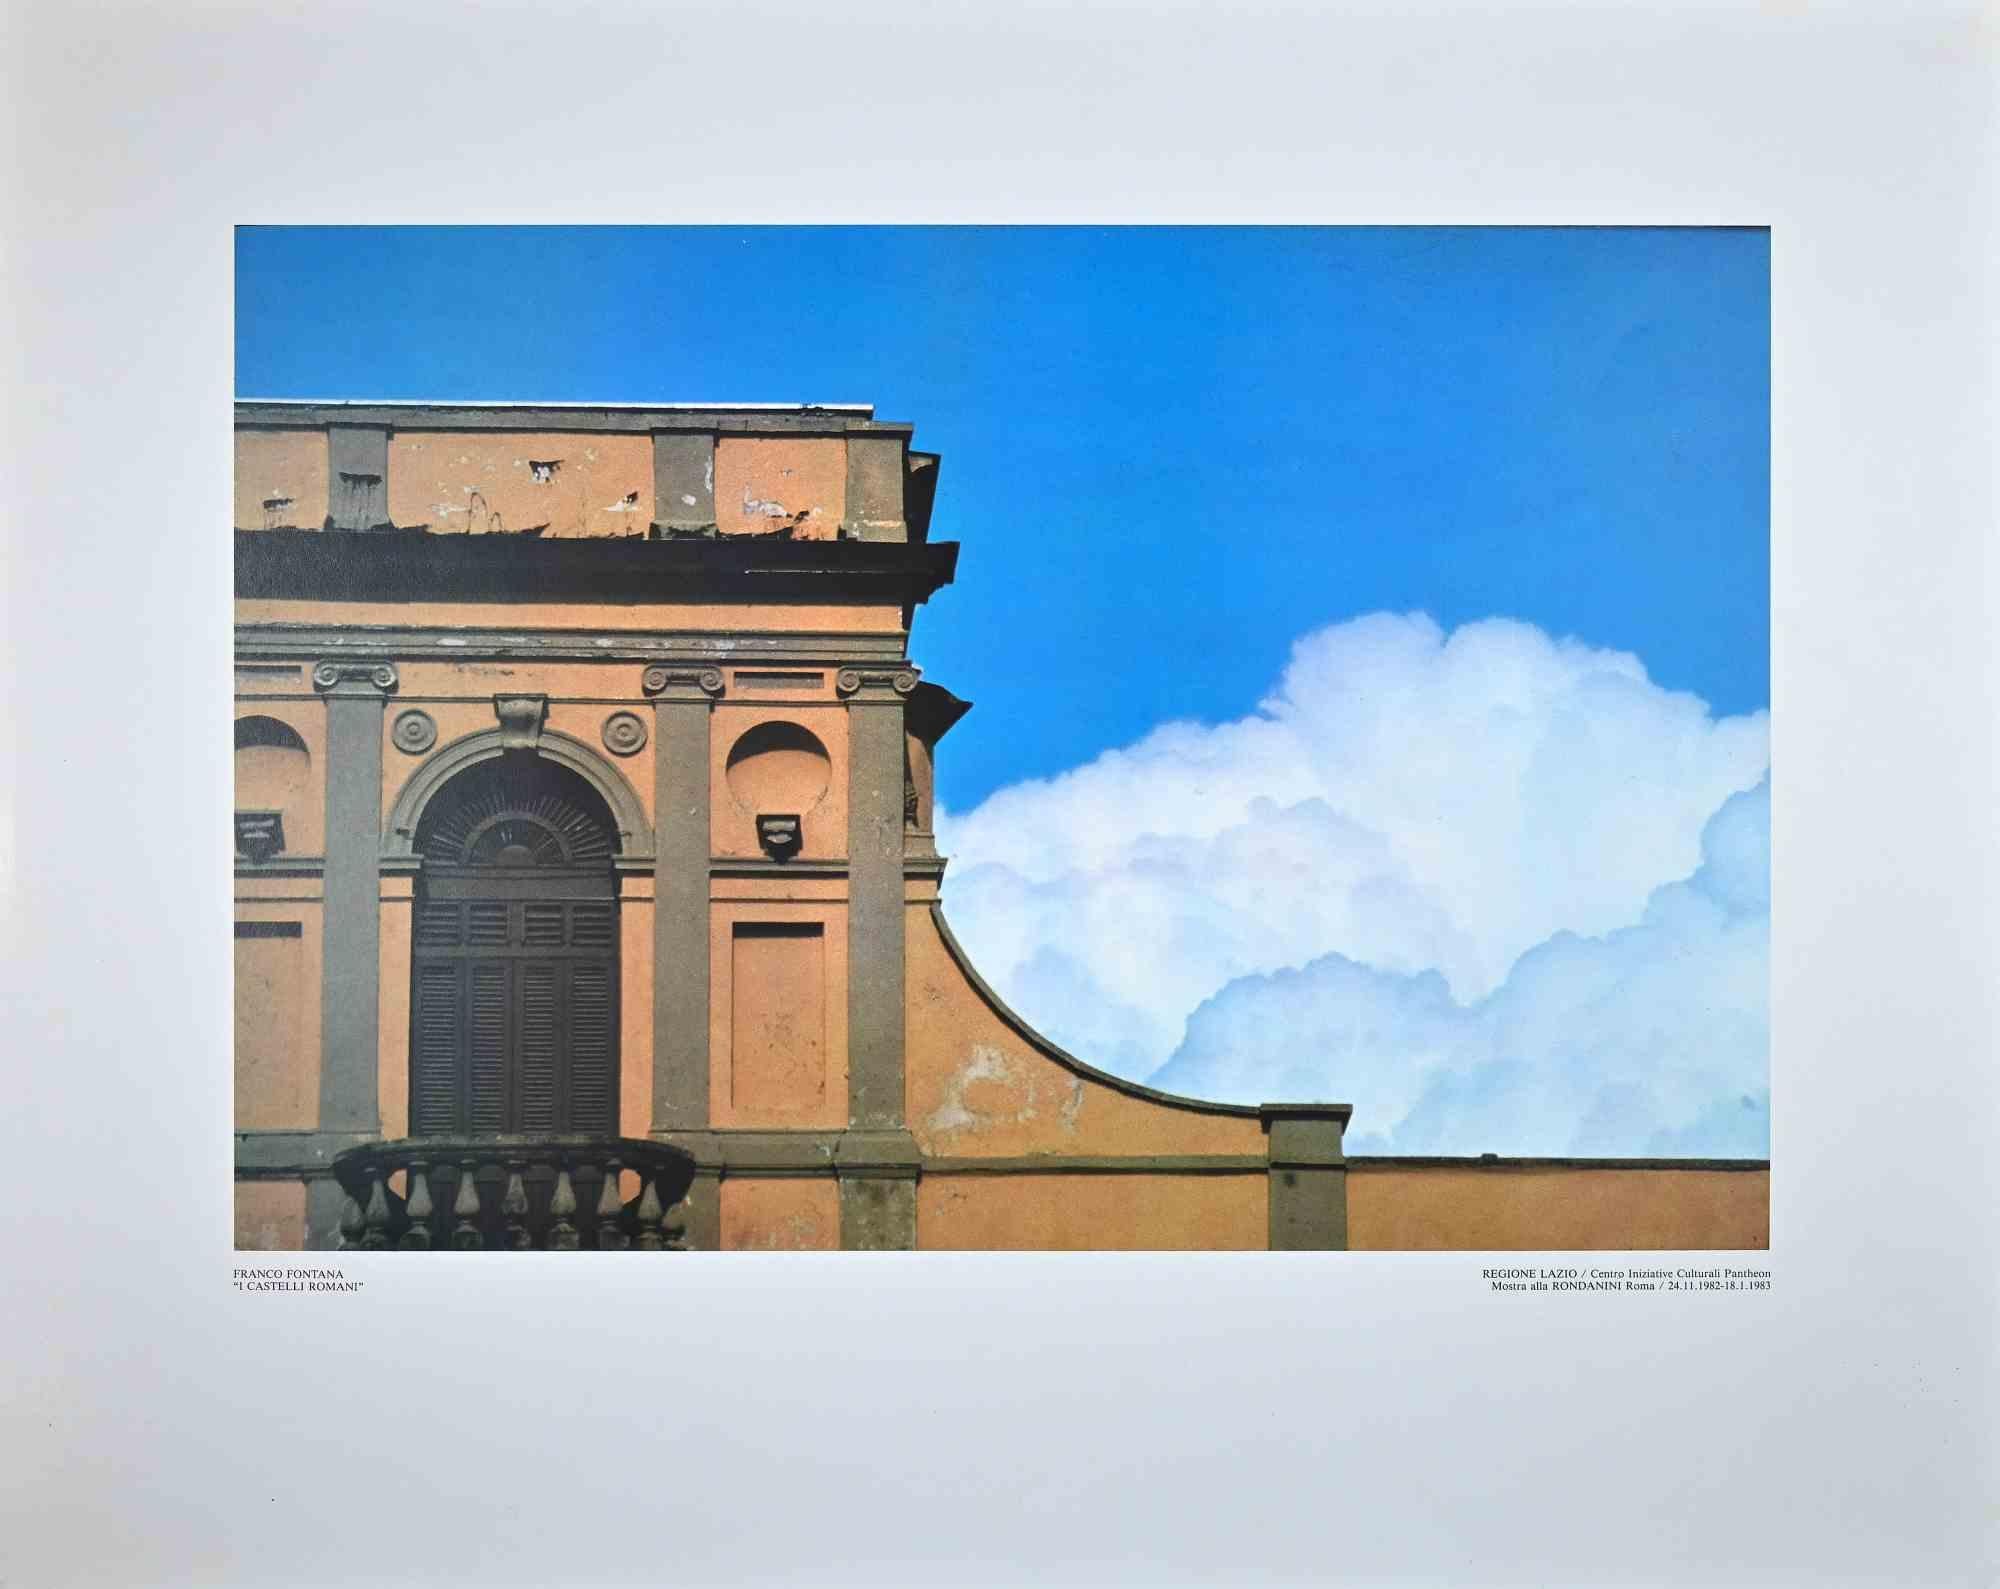 Roman Castels  is a beautiful offset realized by  Franco Fontana .

Good conditions.

Colored poster from a photograph by Franco Fontana (Modena, 1933), one of the Italian most famous contemporary photographers. Titled at the bottom. Very good